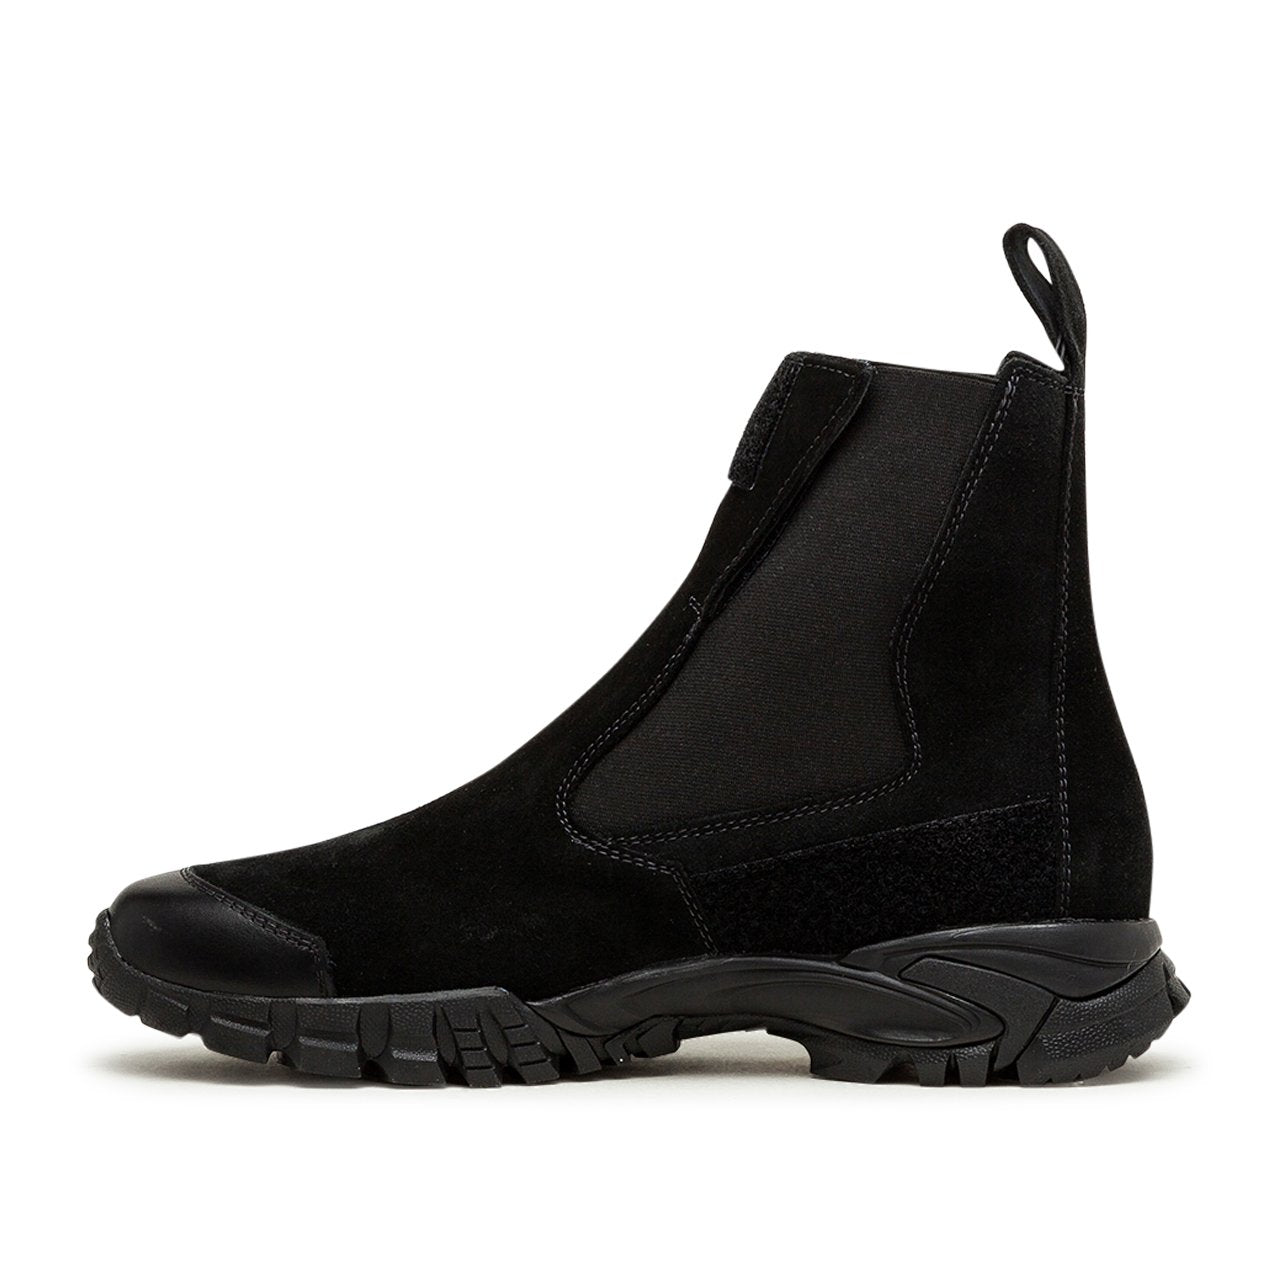 stone island shadow project velcro fastened chelsea boot (black) - 7319s0422 - a.plus - Image - 3